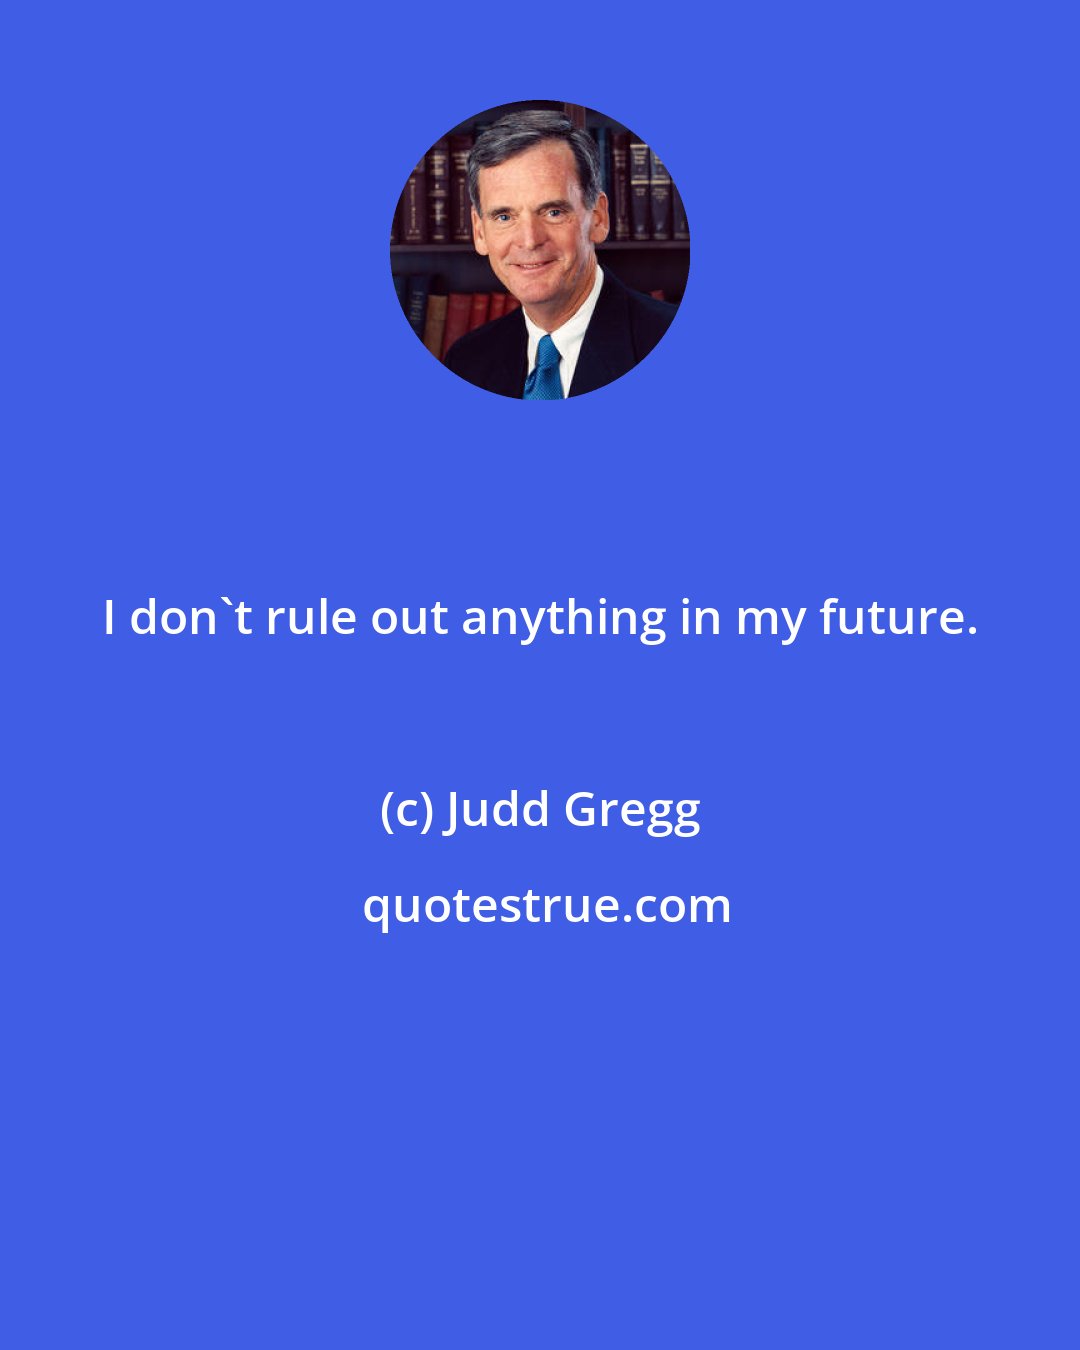 Judd Gregg: I don't rule out anything in my future.